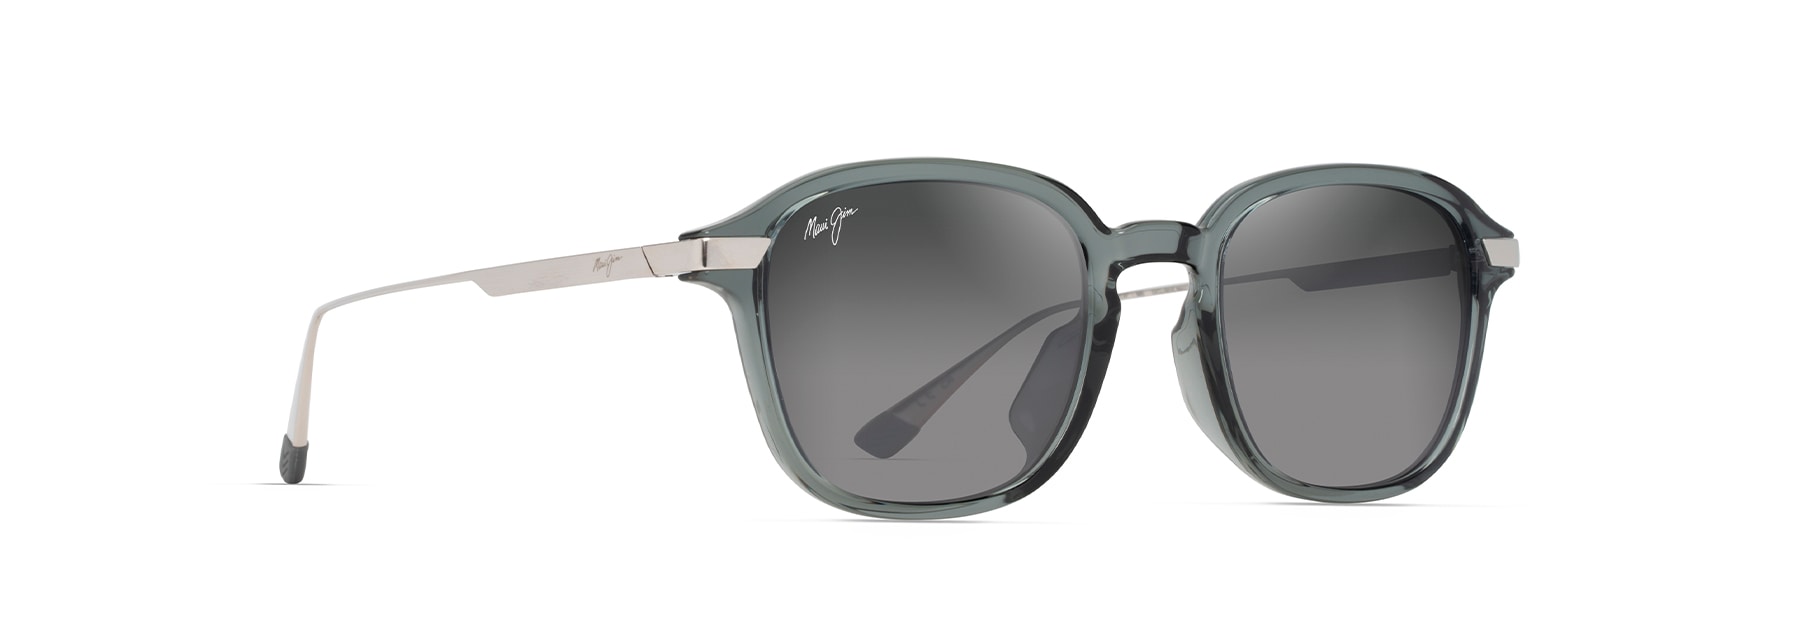 maui_jim_kaouo_asian_fit_shiny_trans_grey_with_silver